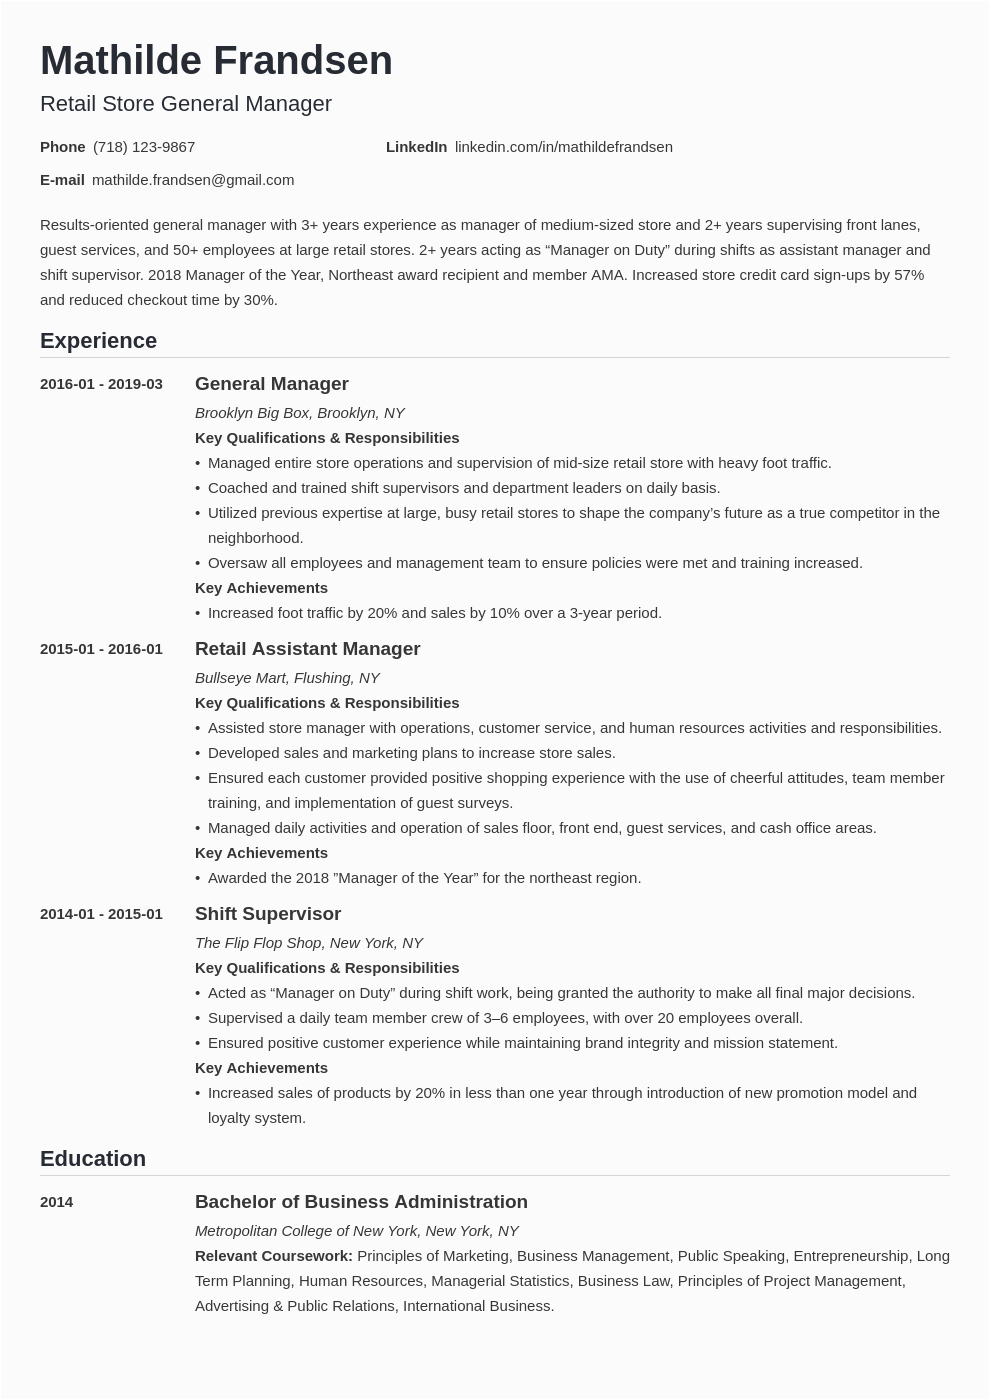 Sample Resume for General Manager Position General Manager Resume Template Guide & 20 Examples